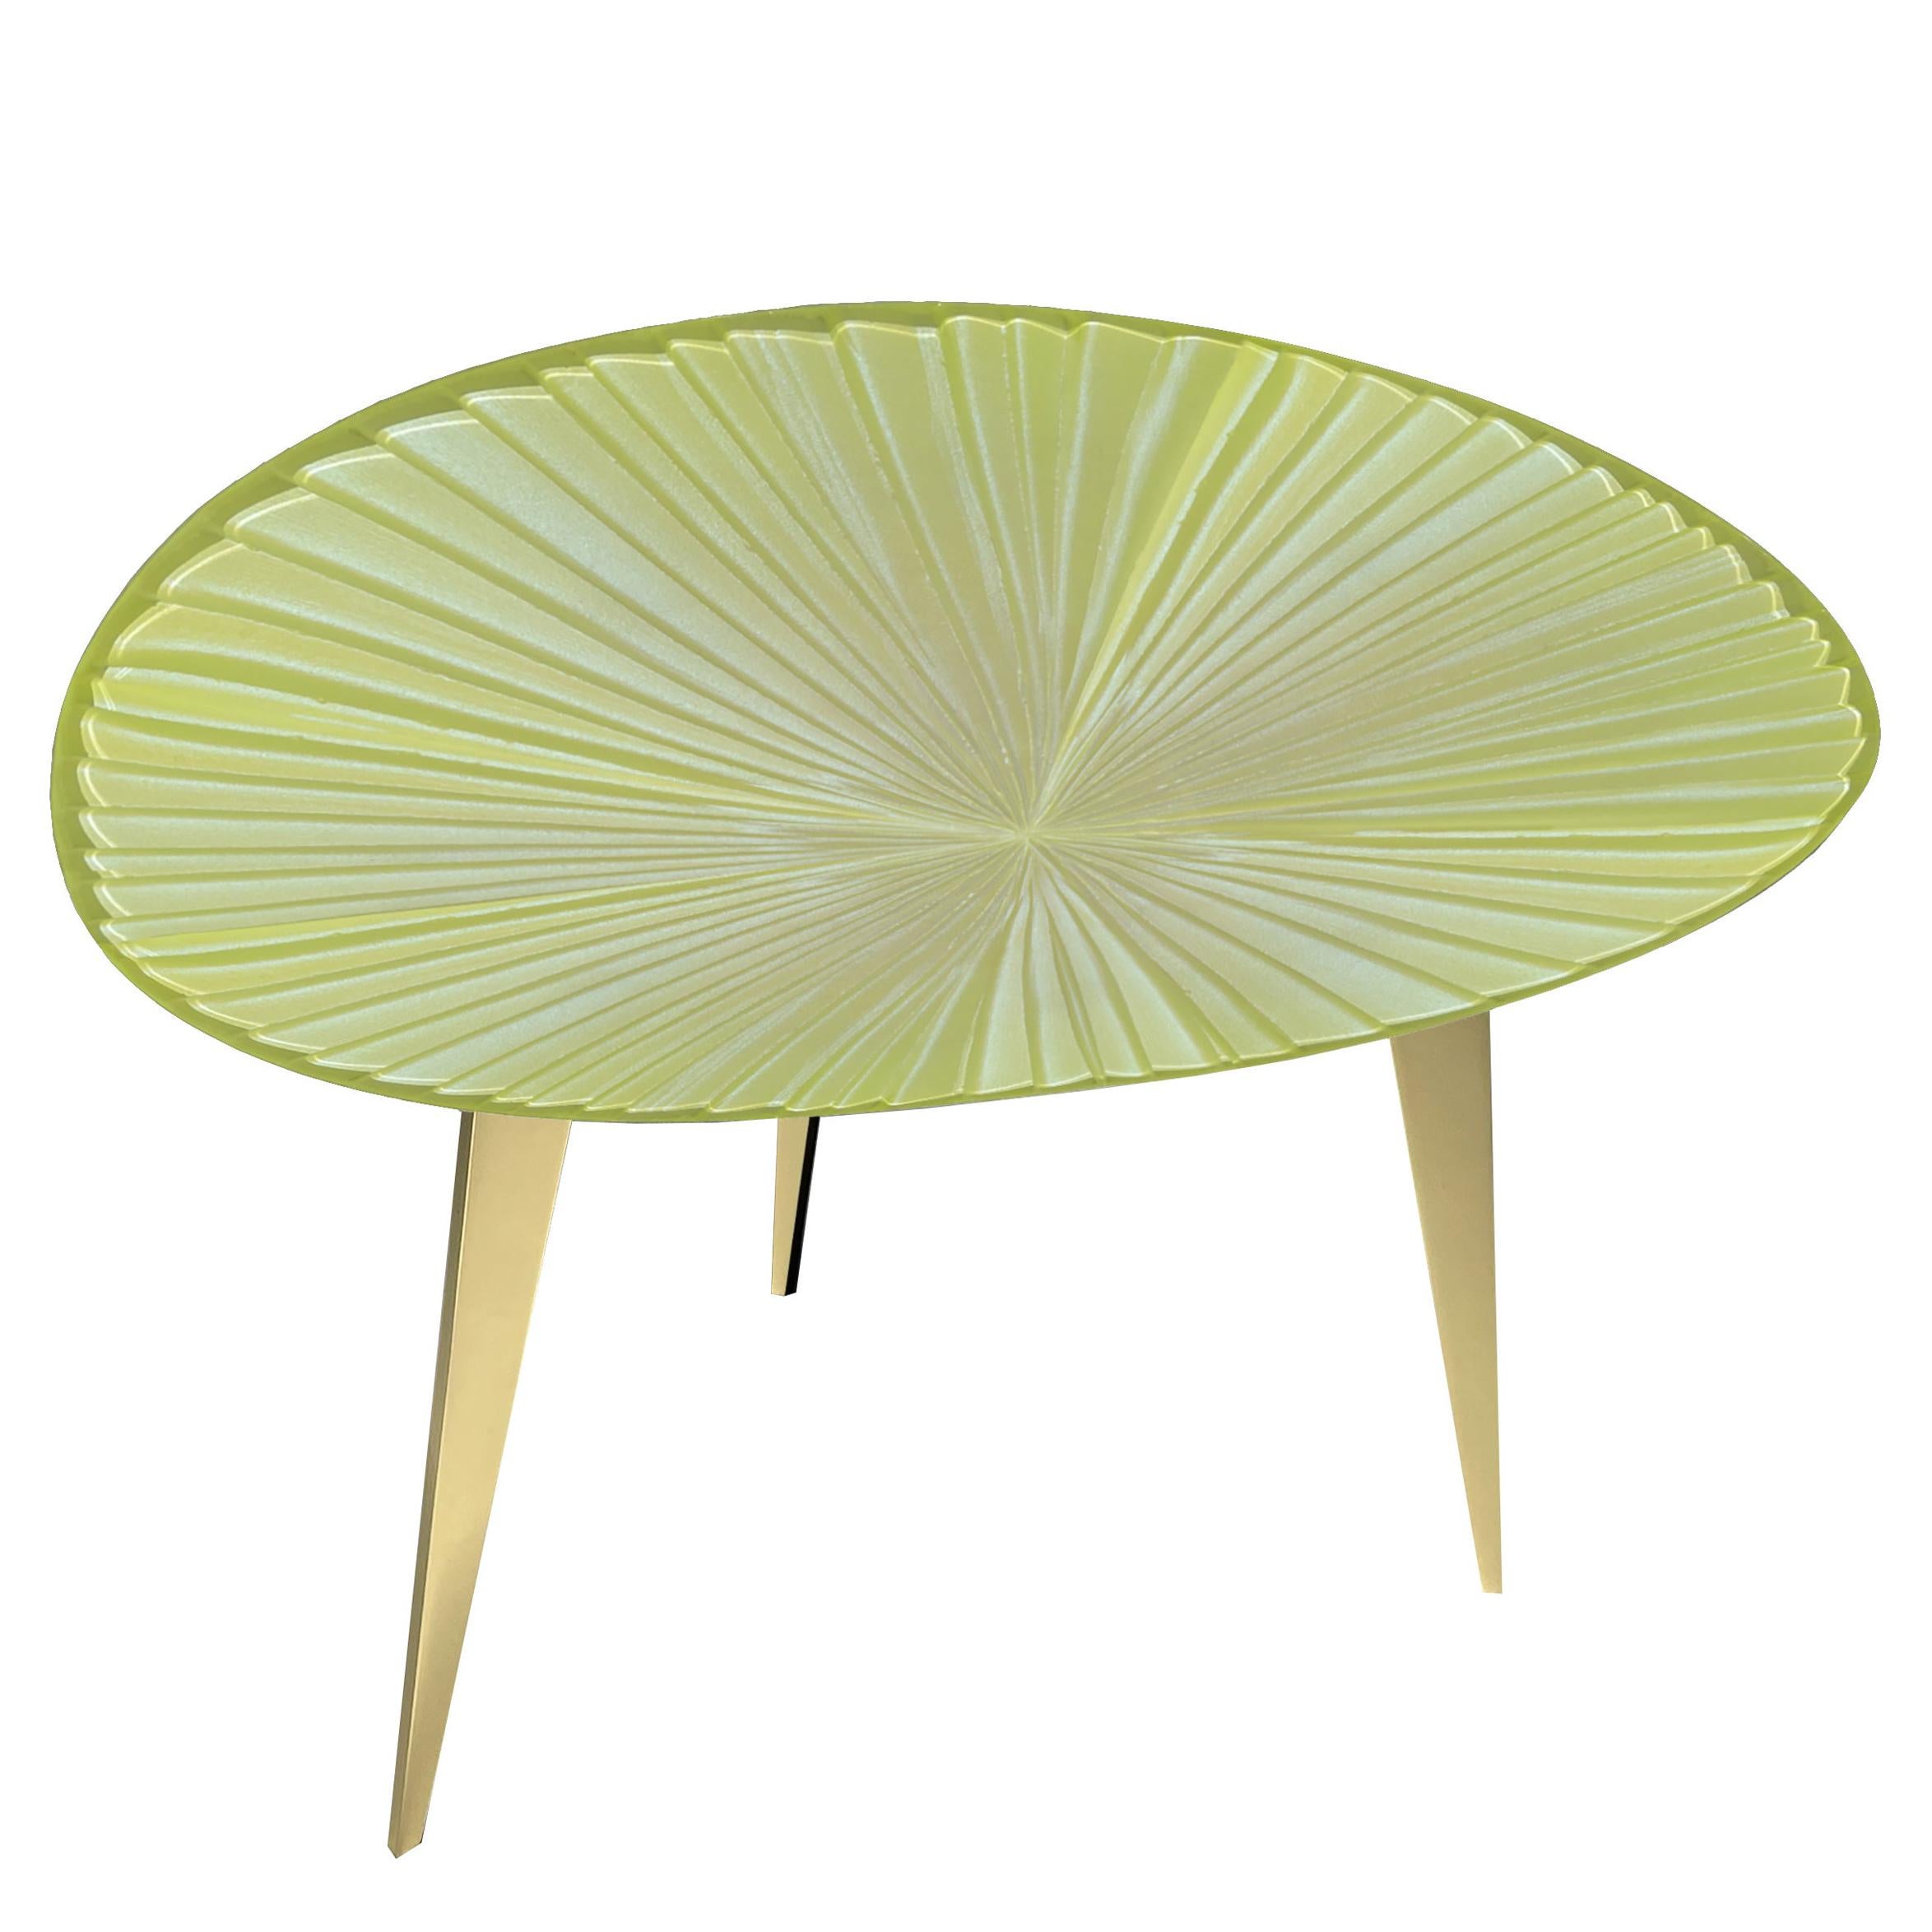 Contemporary 'Fluo' Coffee Table Iridescent Yellow Crystal by Ghirò Studio